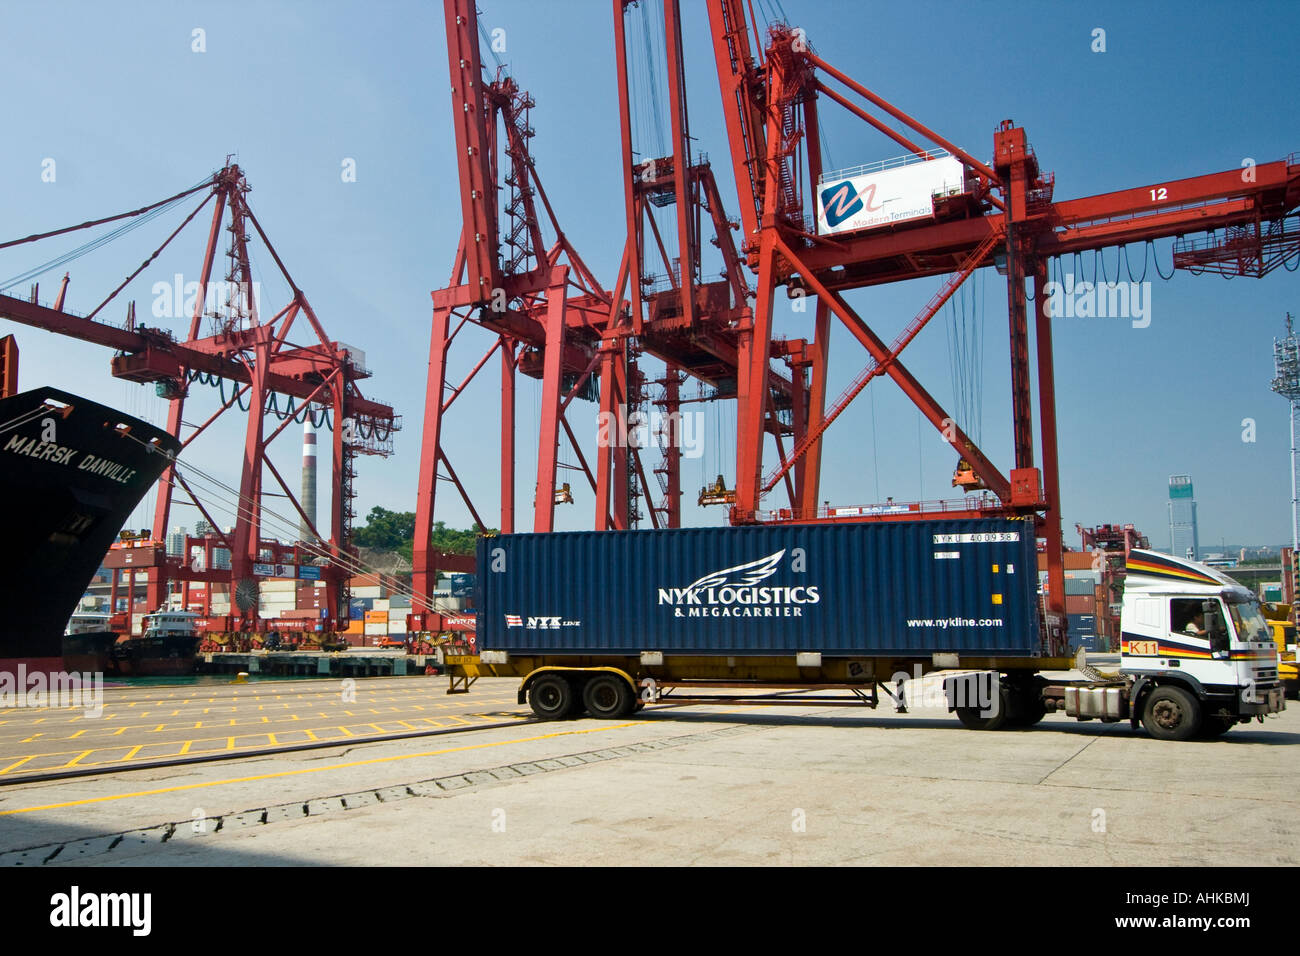 Crane Loaded Truck Driving with NYK Logistics Shipping Container, Hong Kong Port Docks Stock Photo